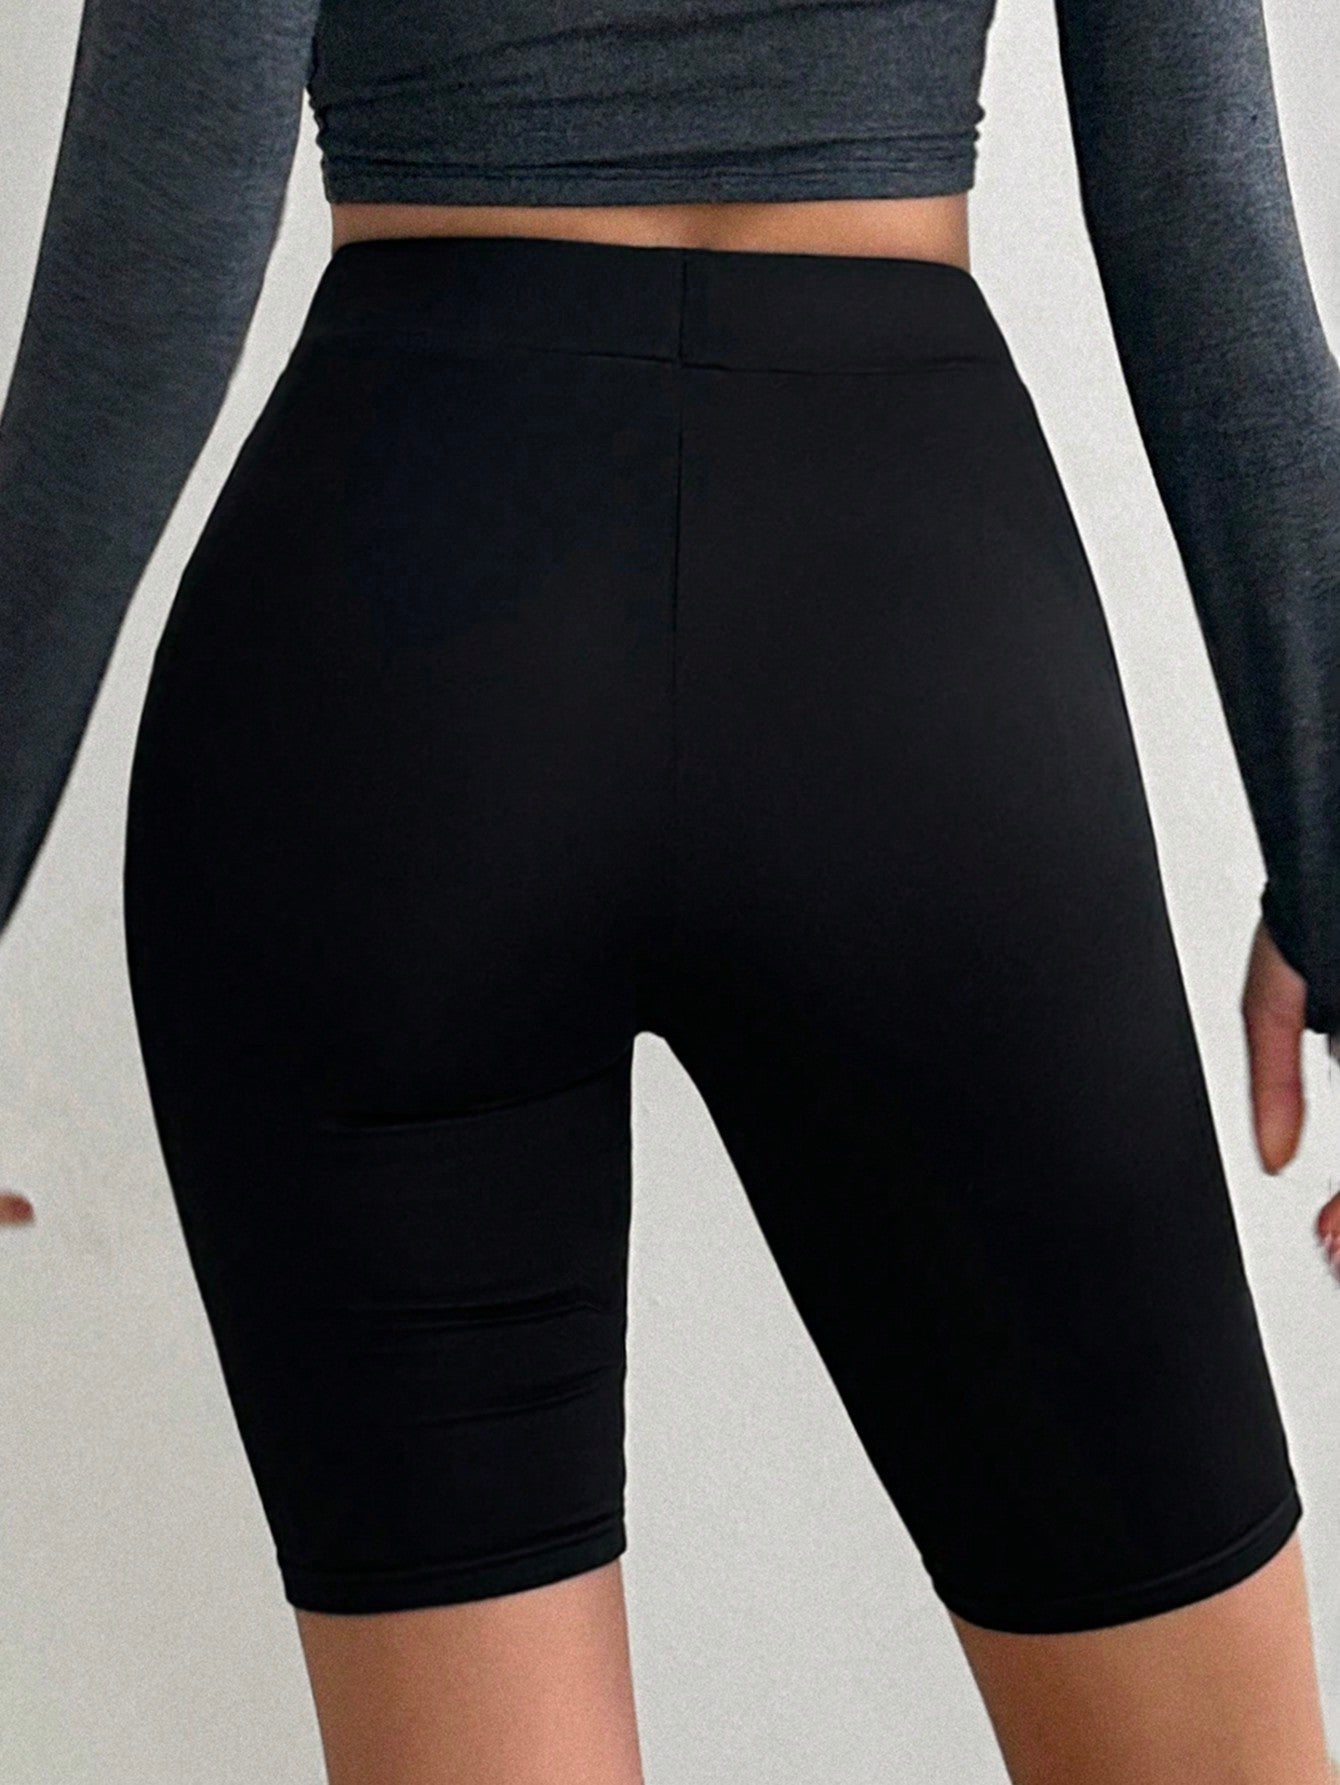 Women's Solid Color Basic Leggings, Suitable For Daily Wear